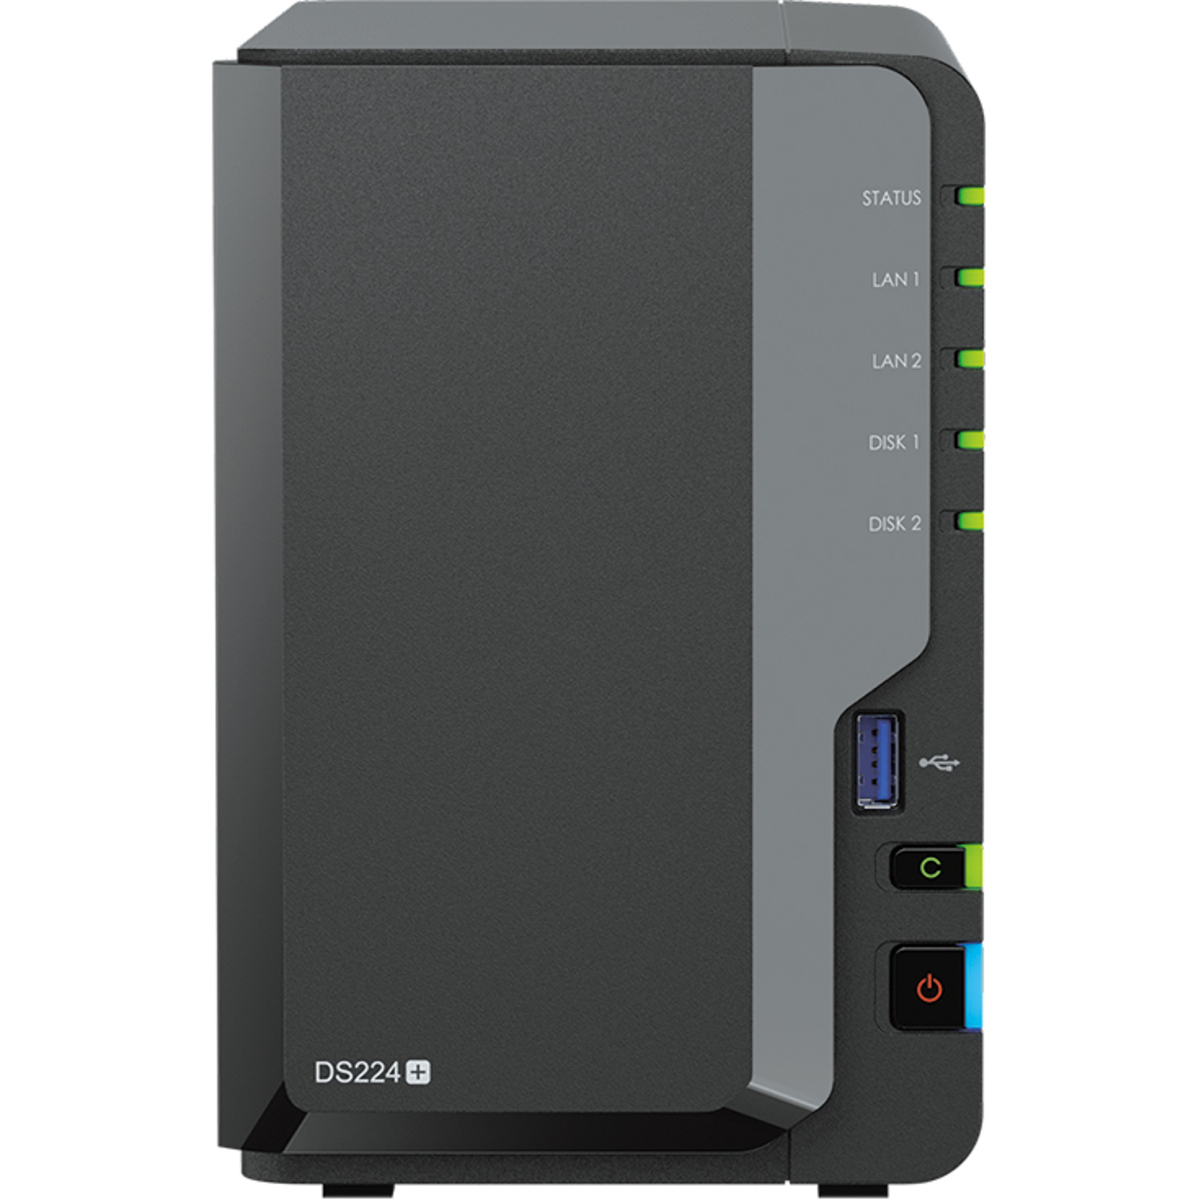 Synology DiskStation DS224+ 16tb 2-Bay Desktop Personal / Basic Home / Small Office NAS - Network Attached Storage Device 2x8tb Seagate IronWolf Pro ST8000NT001 3.5 7200rpm SATA 6Gb/s HDD NAS Class Drives Installed - Burn-In Tested - ON SALE - FREE RAM UPGRADE DiskStation DS224+